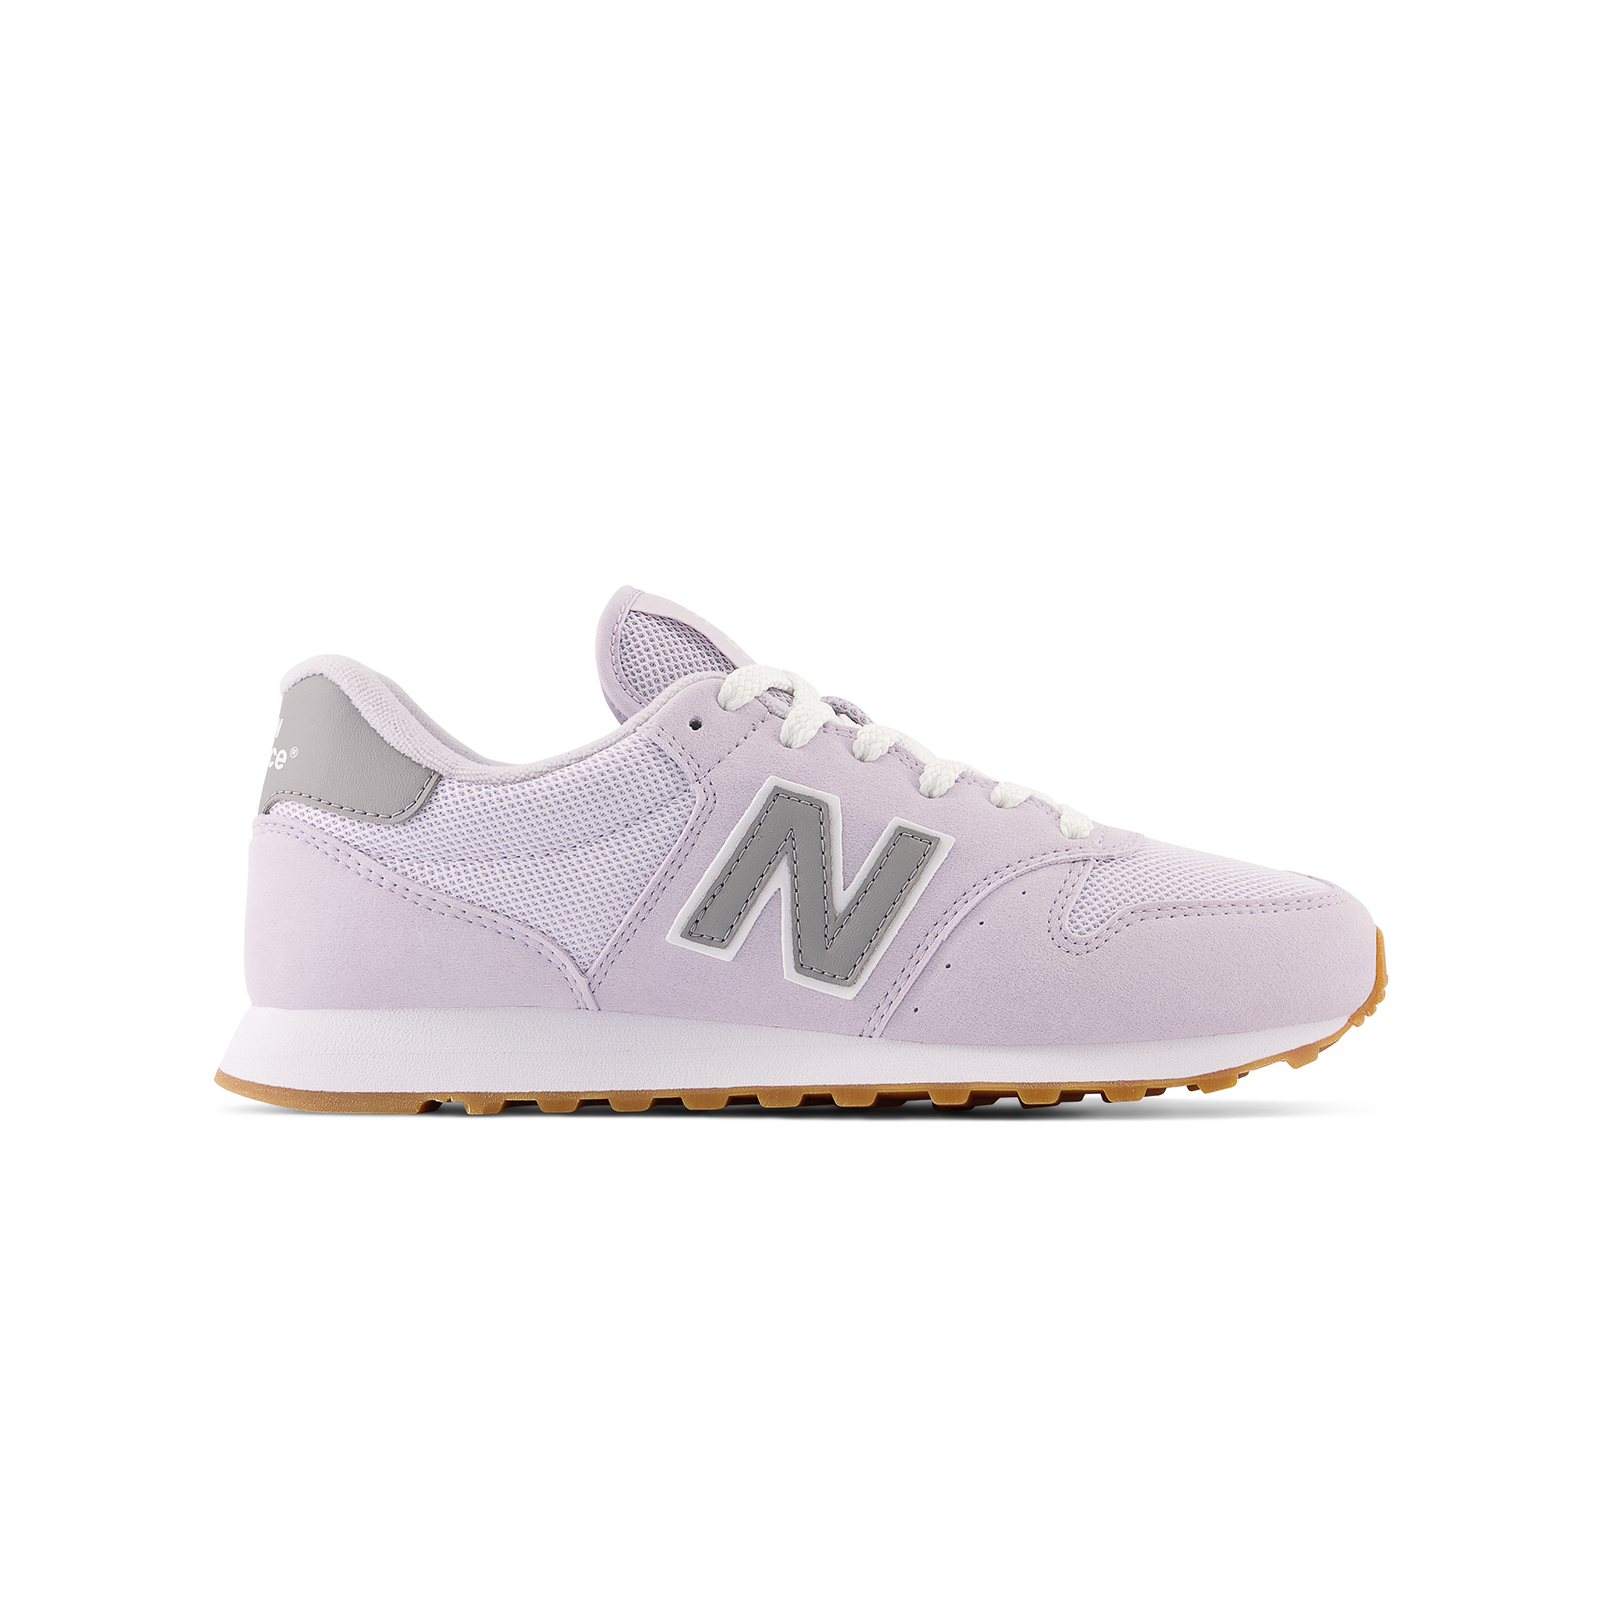 New balance ls - SHOES CLASSIC RUNNING - GREY VIOLET